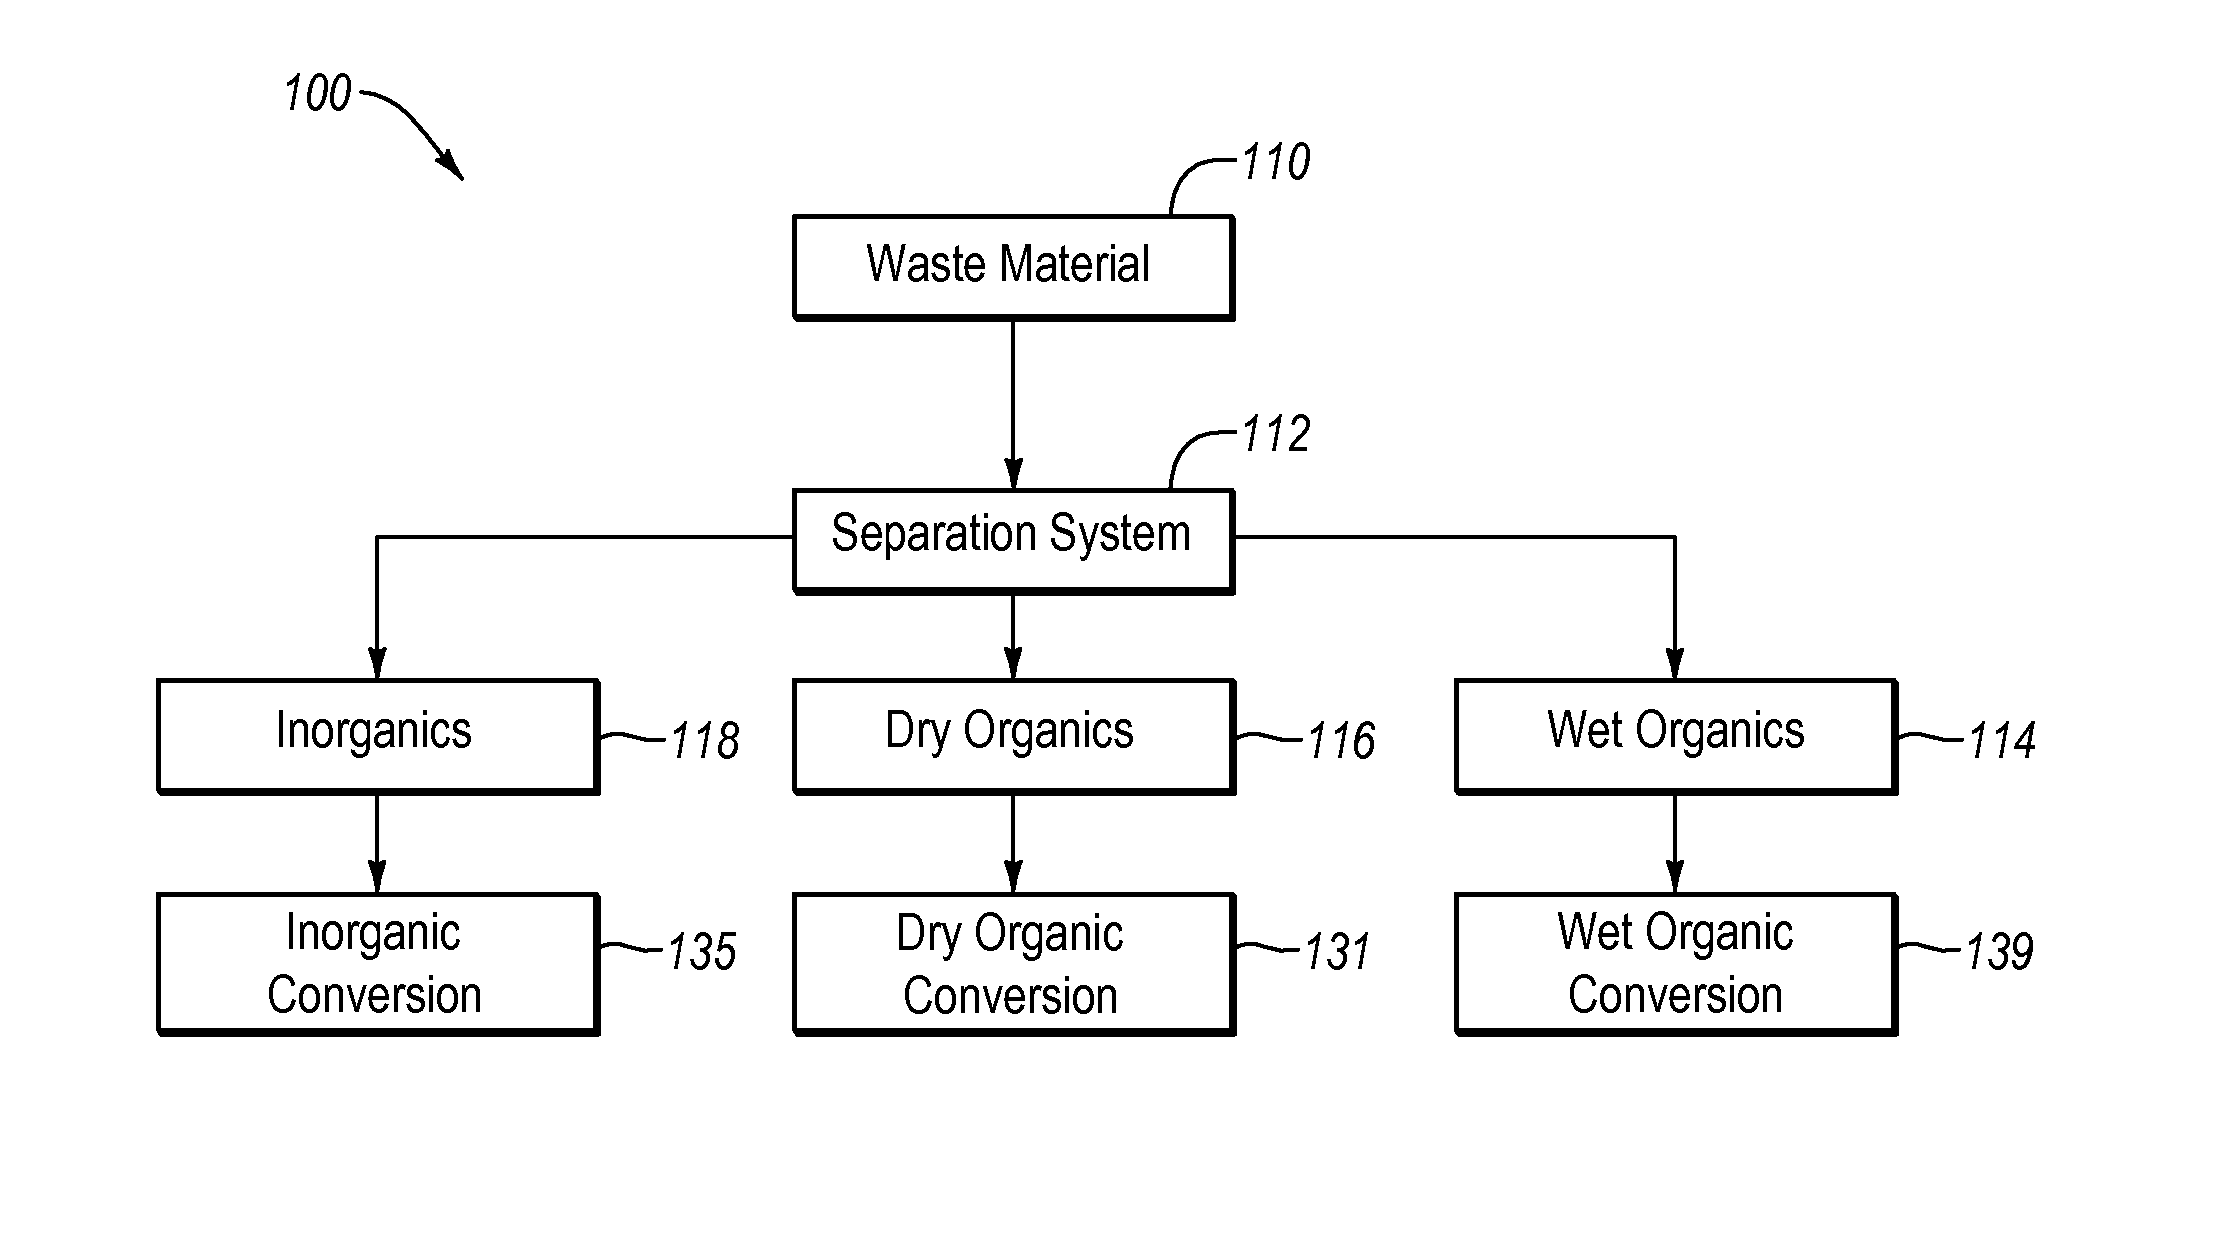 Systems and methods for processing mixed solid waste